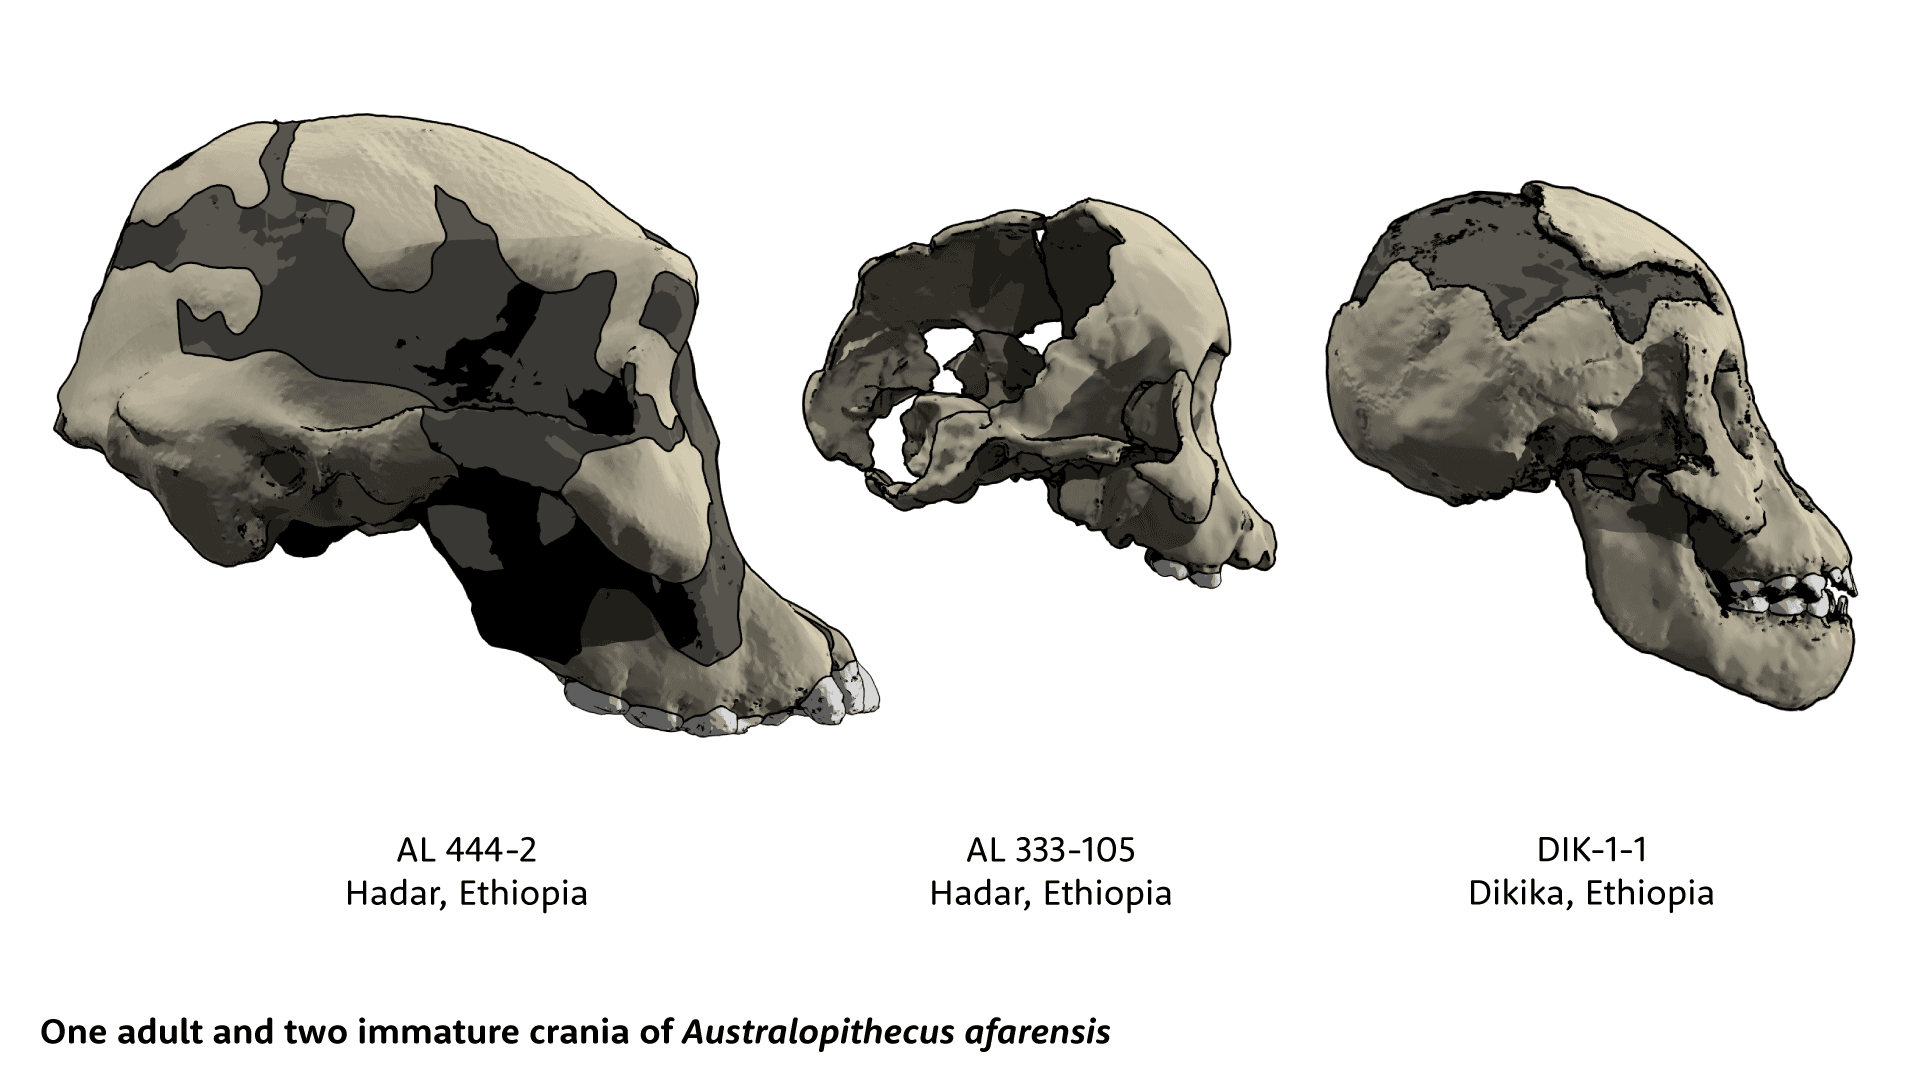 Guide to Australopithecus species